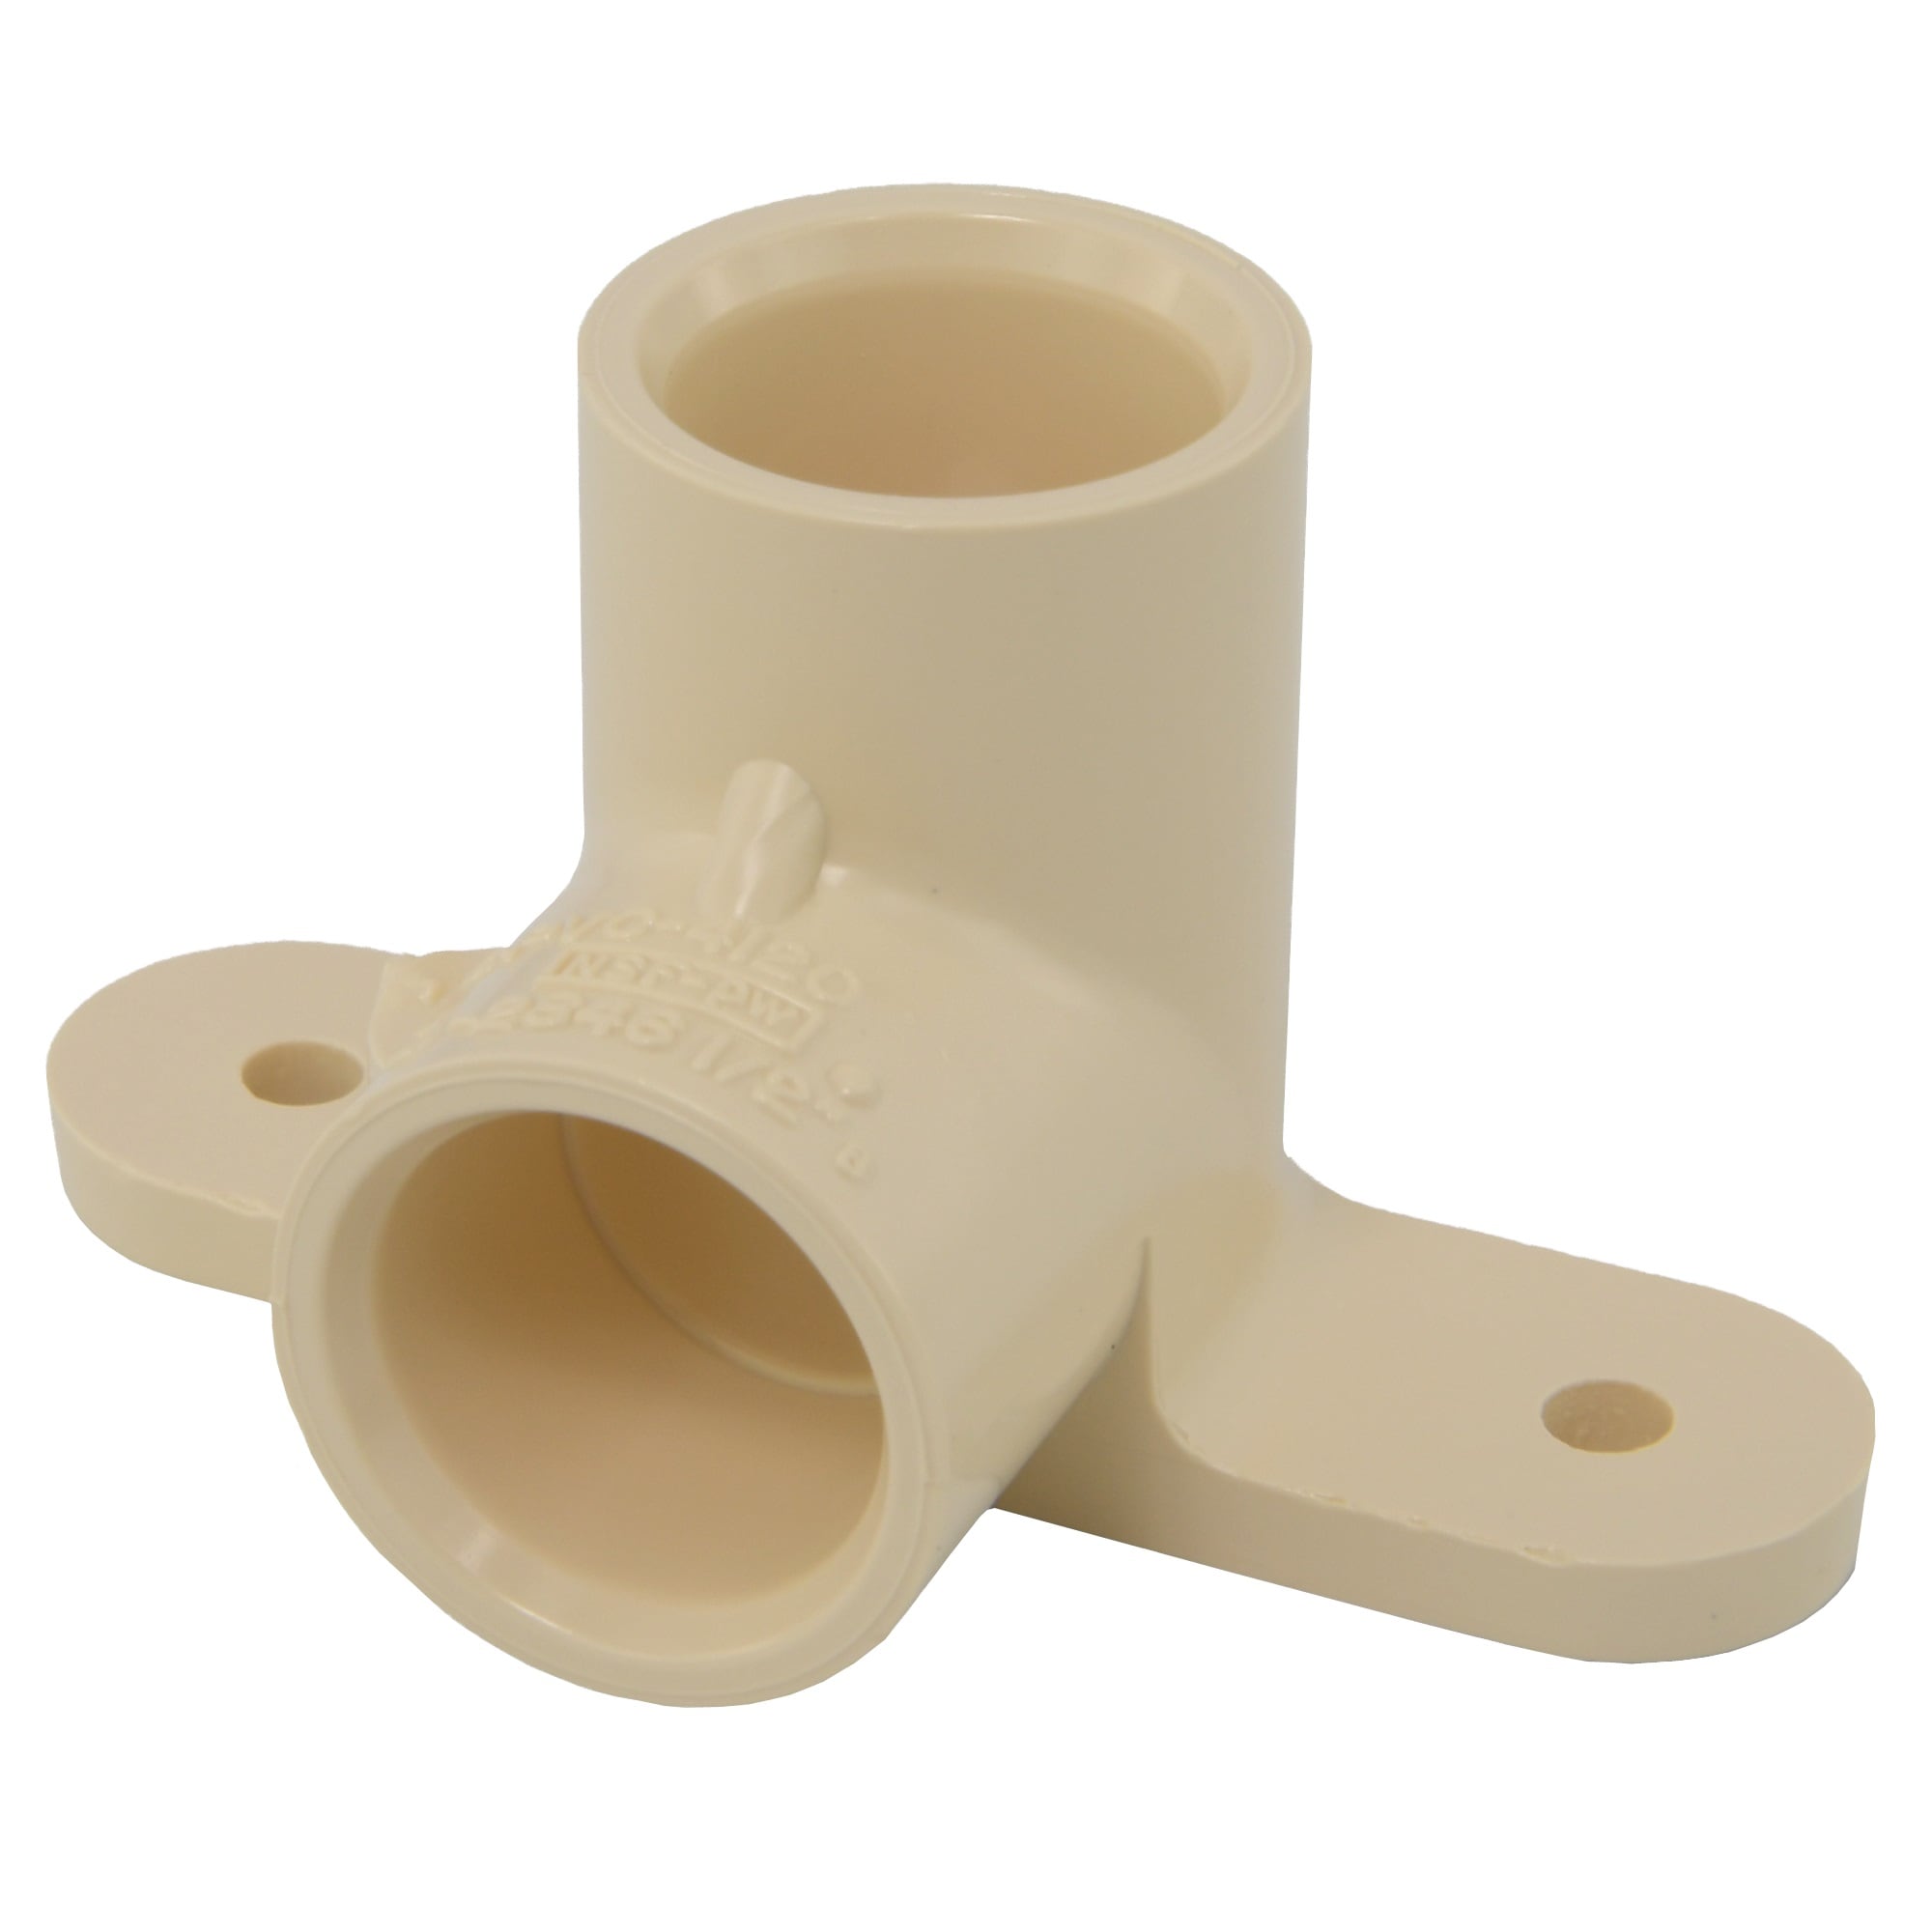 Charlotte Pipe 1/2-in 90-Degree CPVC Dropear Elbow | CTS 02300D 0600 -  CTS02300D0600